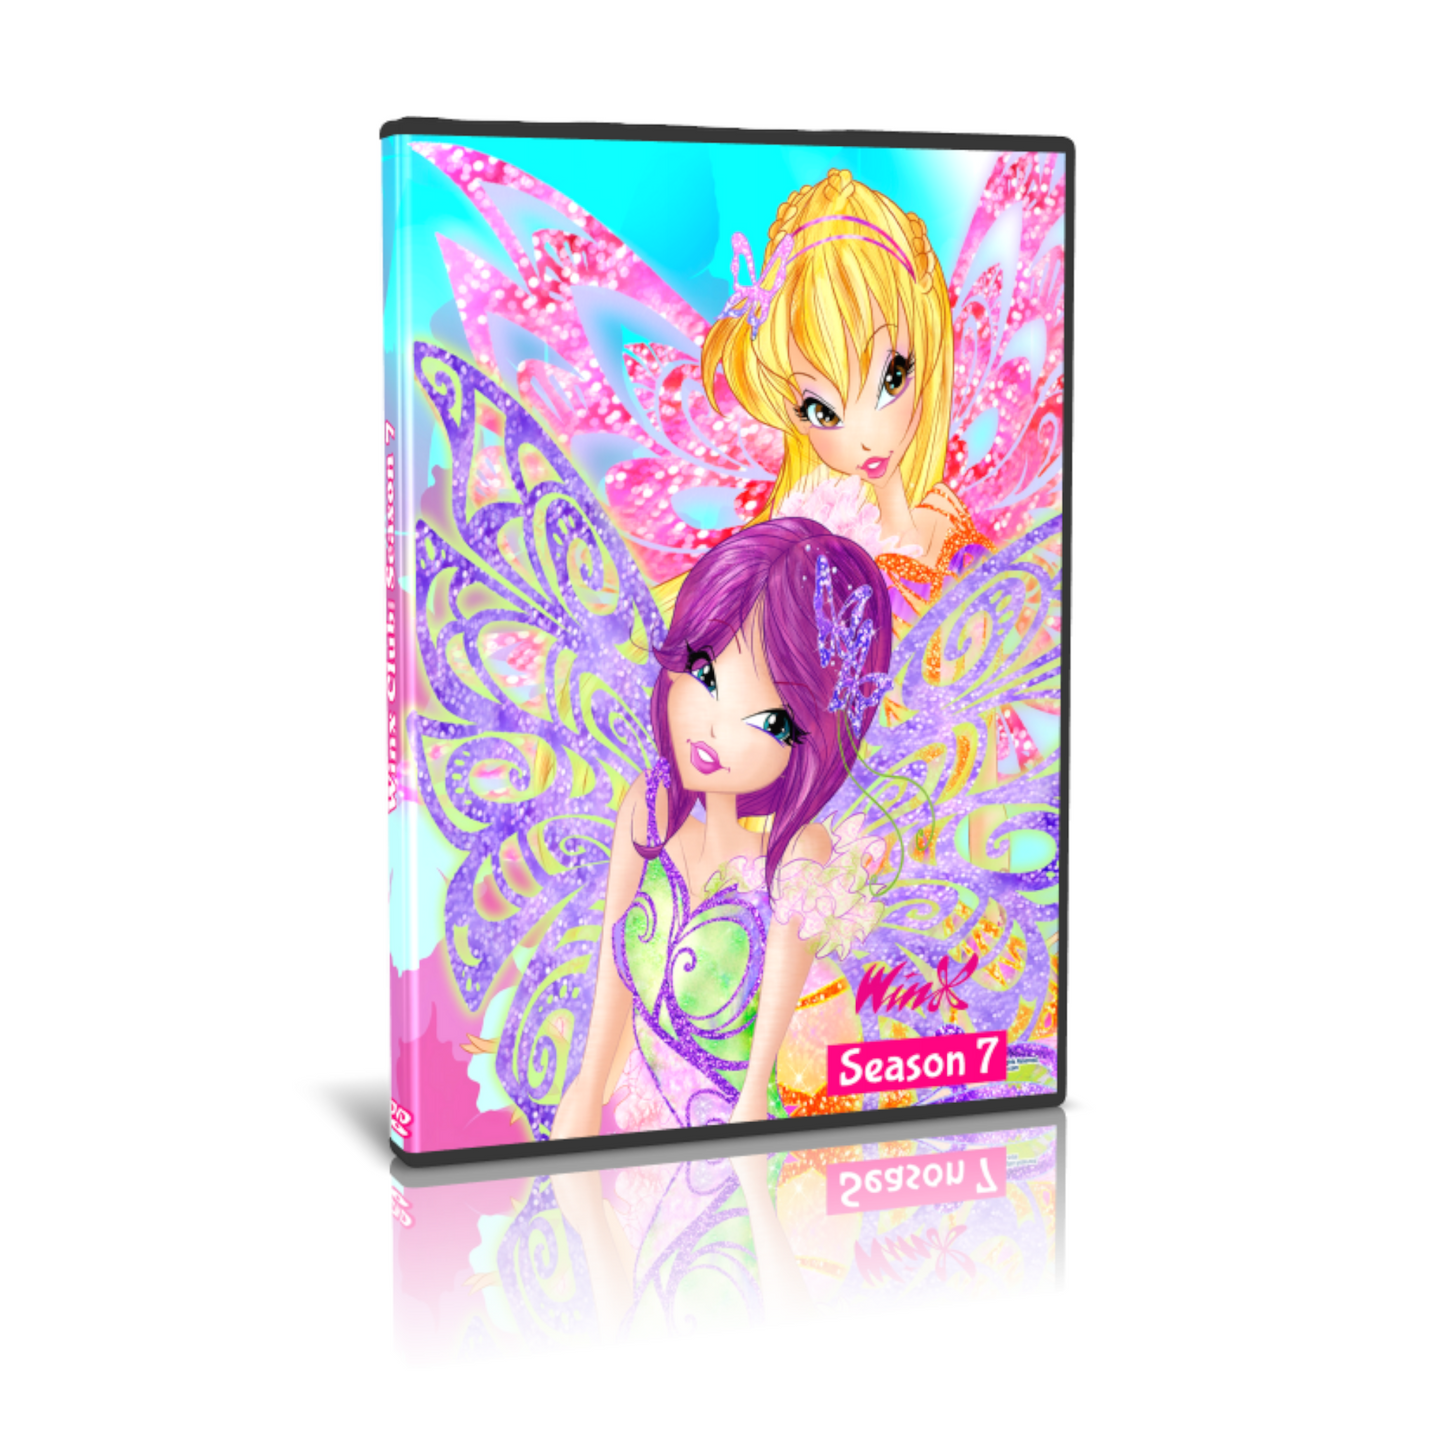 Winx Club Complete Series DVD Sets - RetroAnimation 